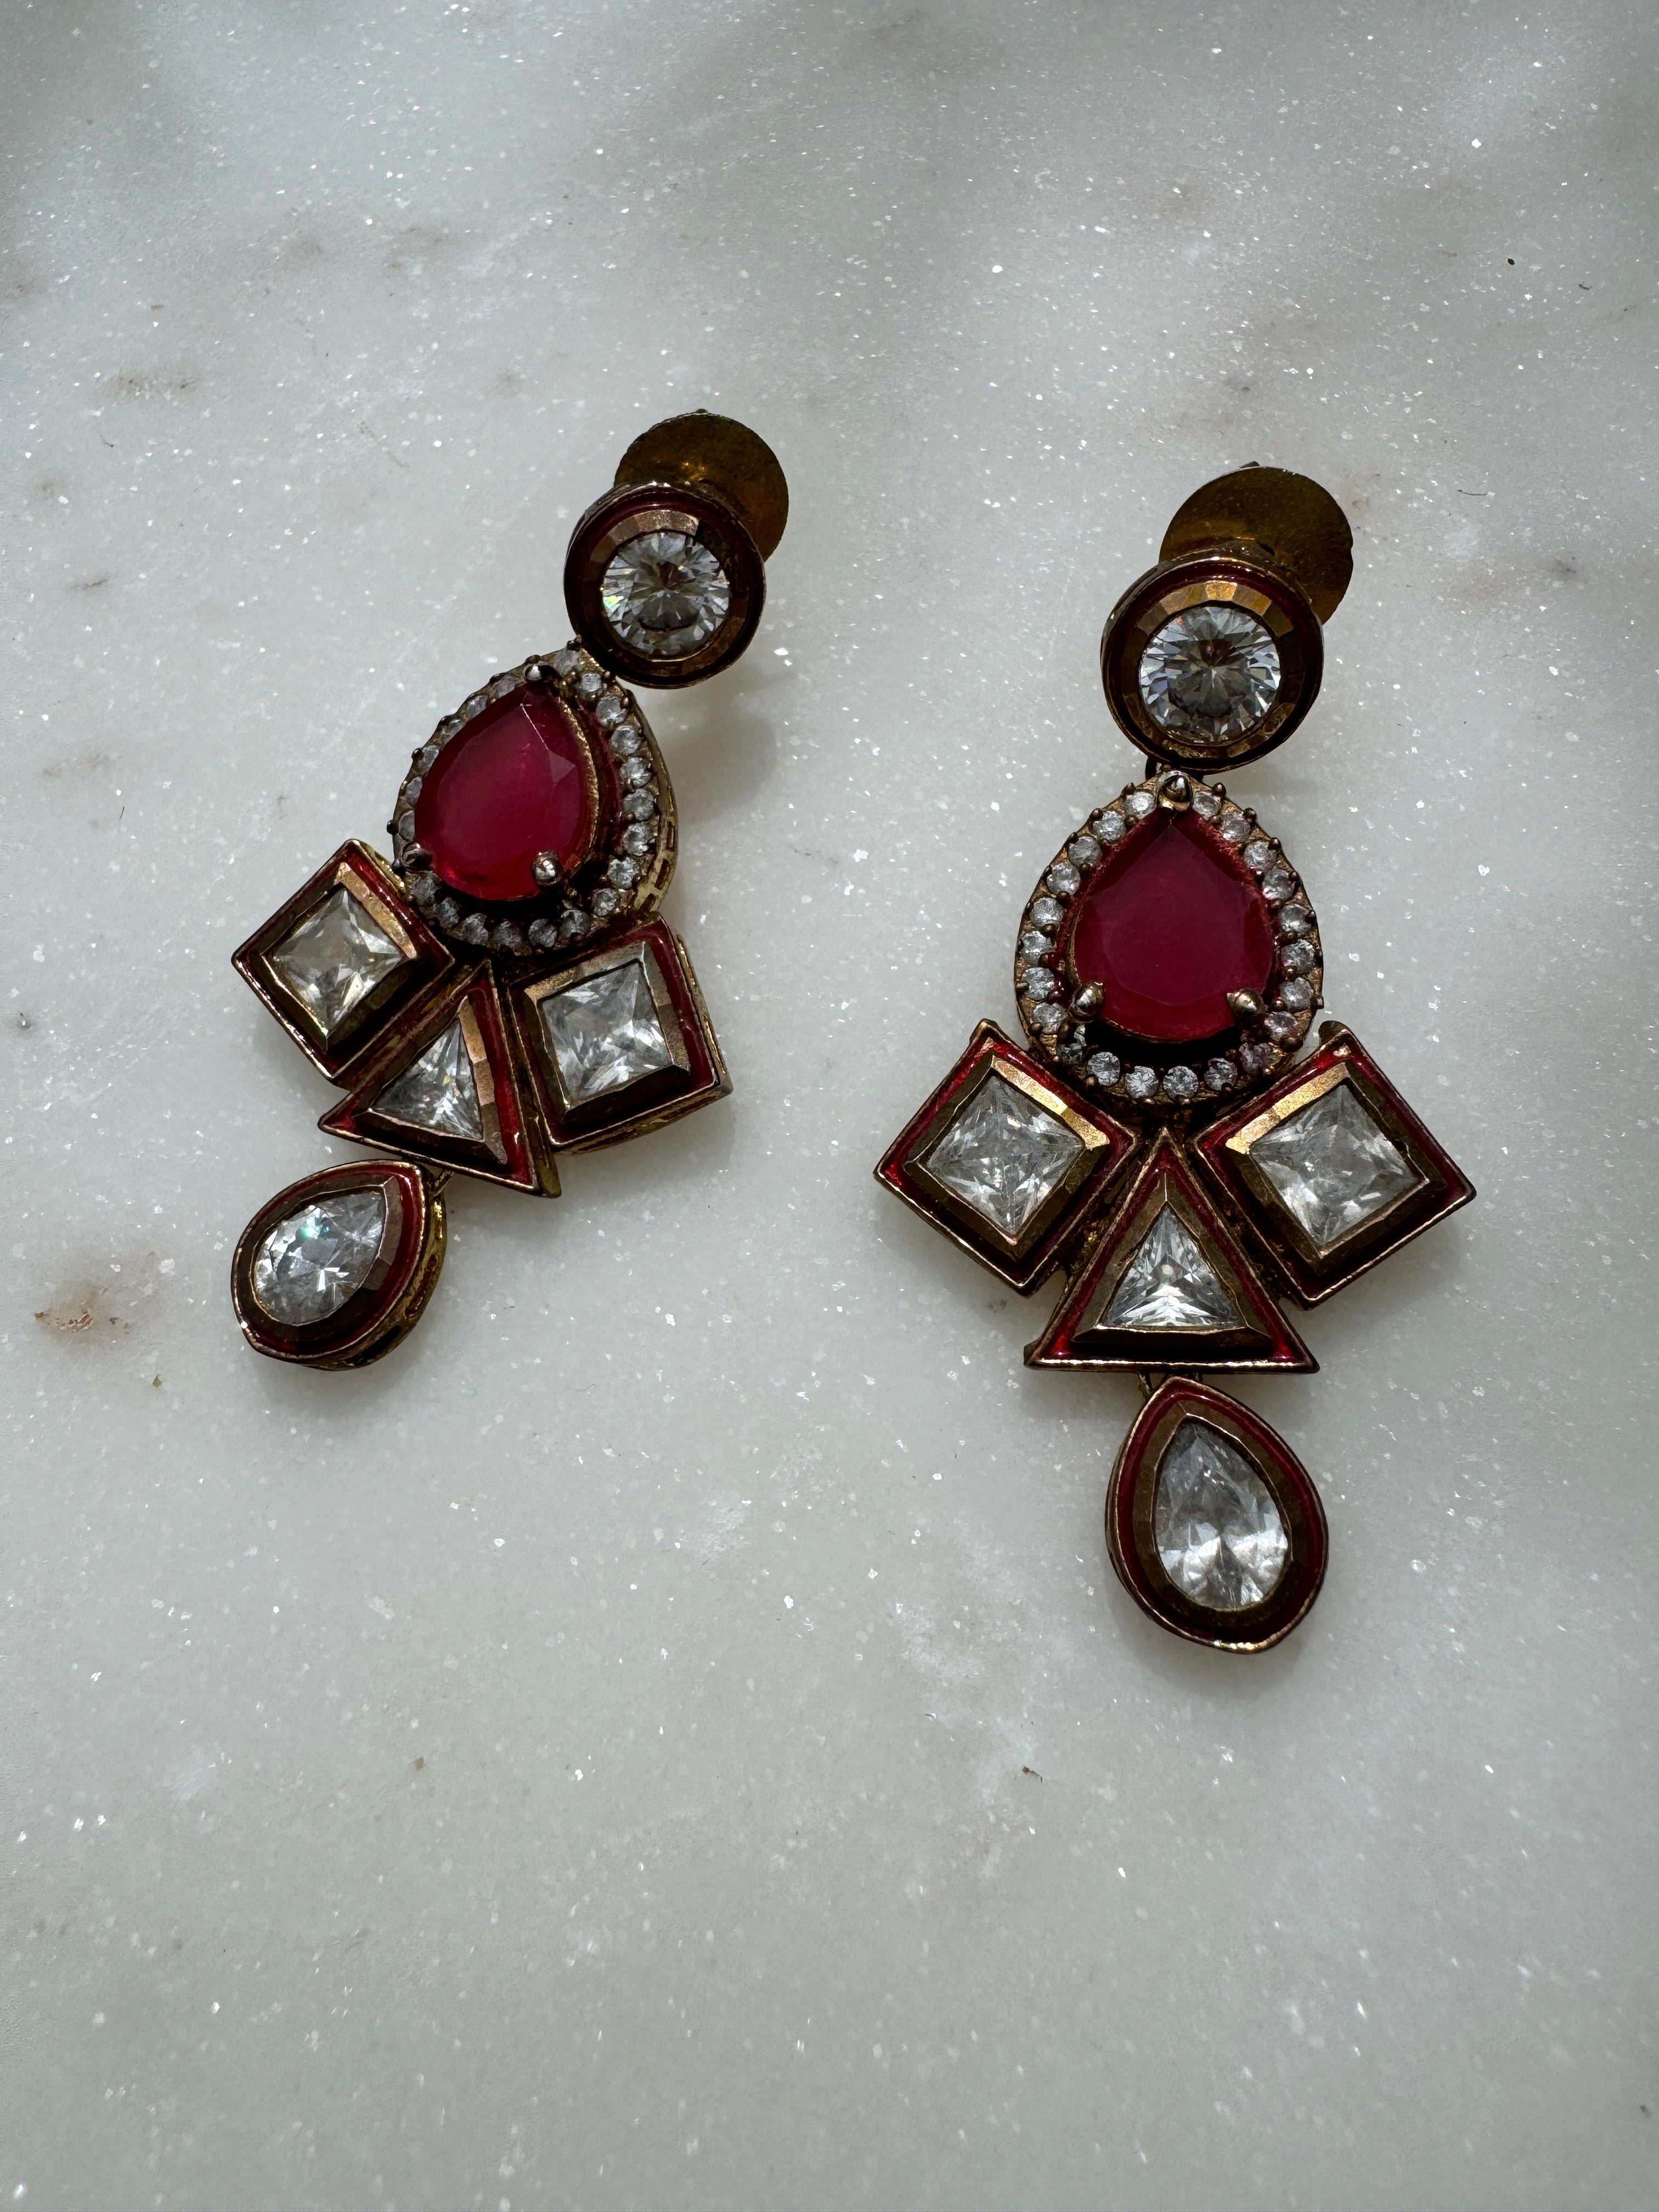 Future Nomads Earrings Red Agate & Crystal Earrings Gold Plated